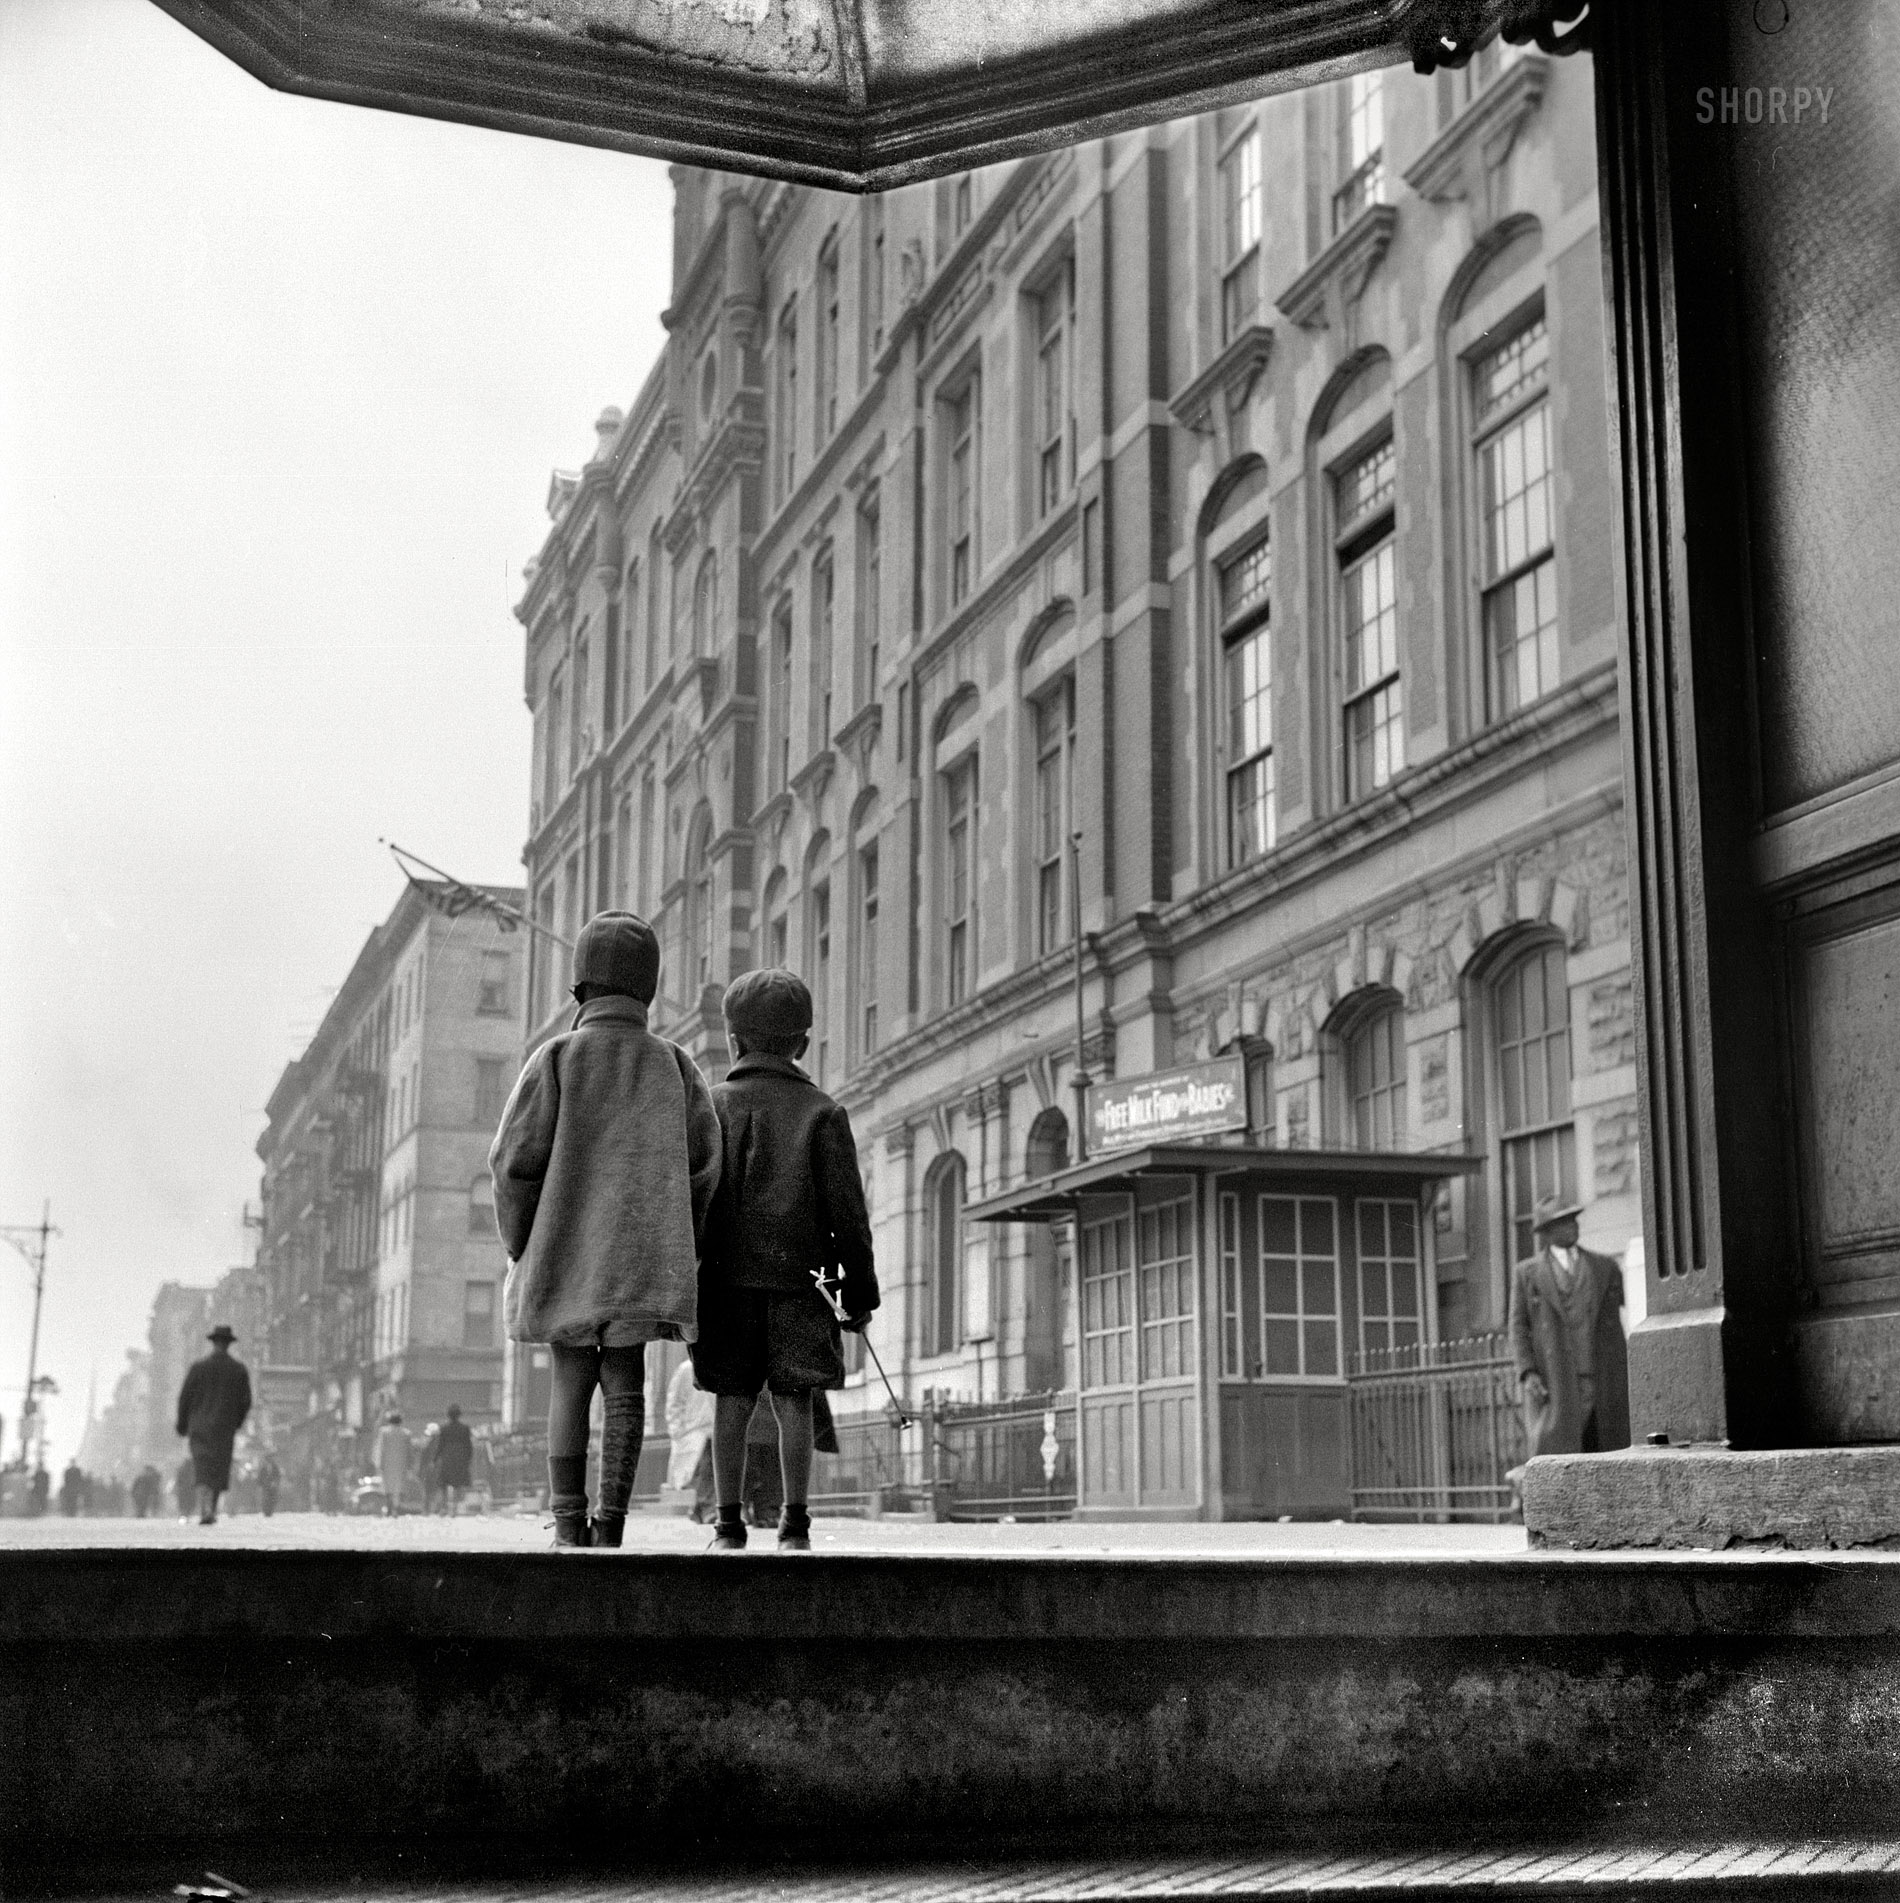 Spring 1943. "A Harlem scene." Viewed from the subway entrance. Medium-format negative by Gordon Parks, Office of War Information. View full size.
